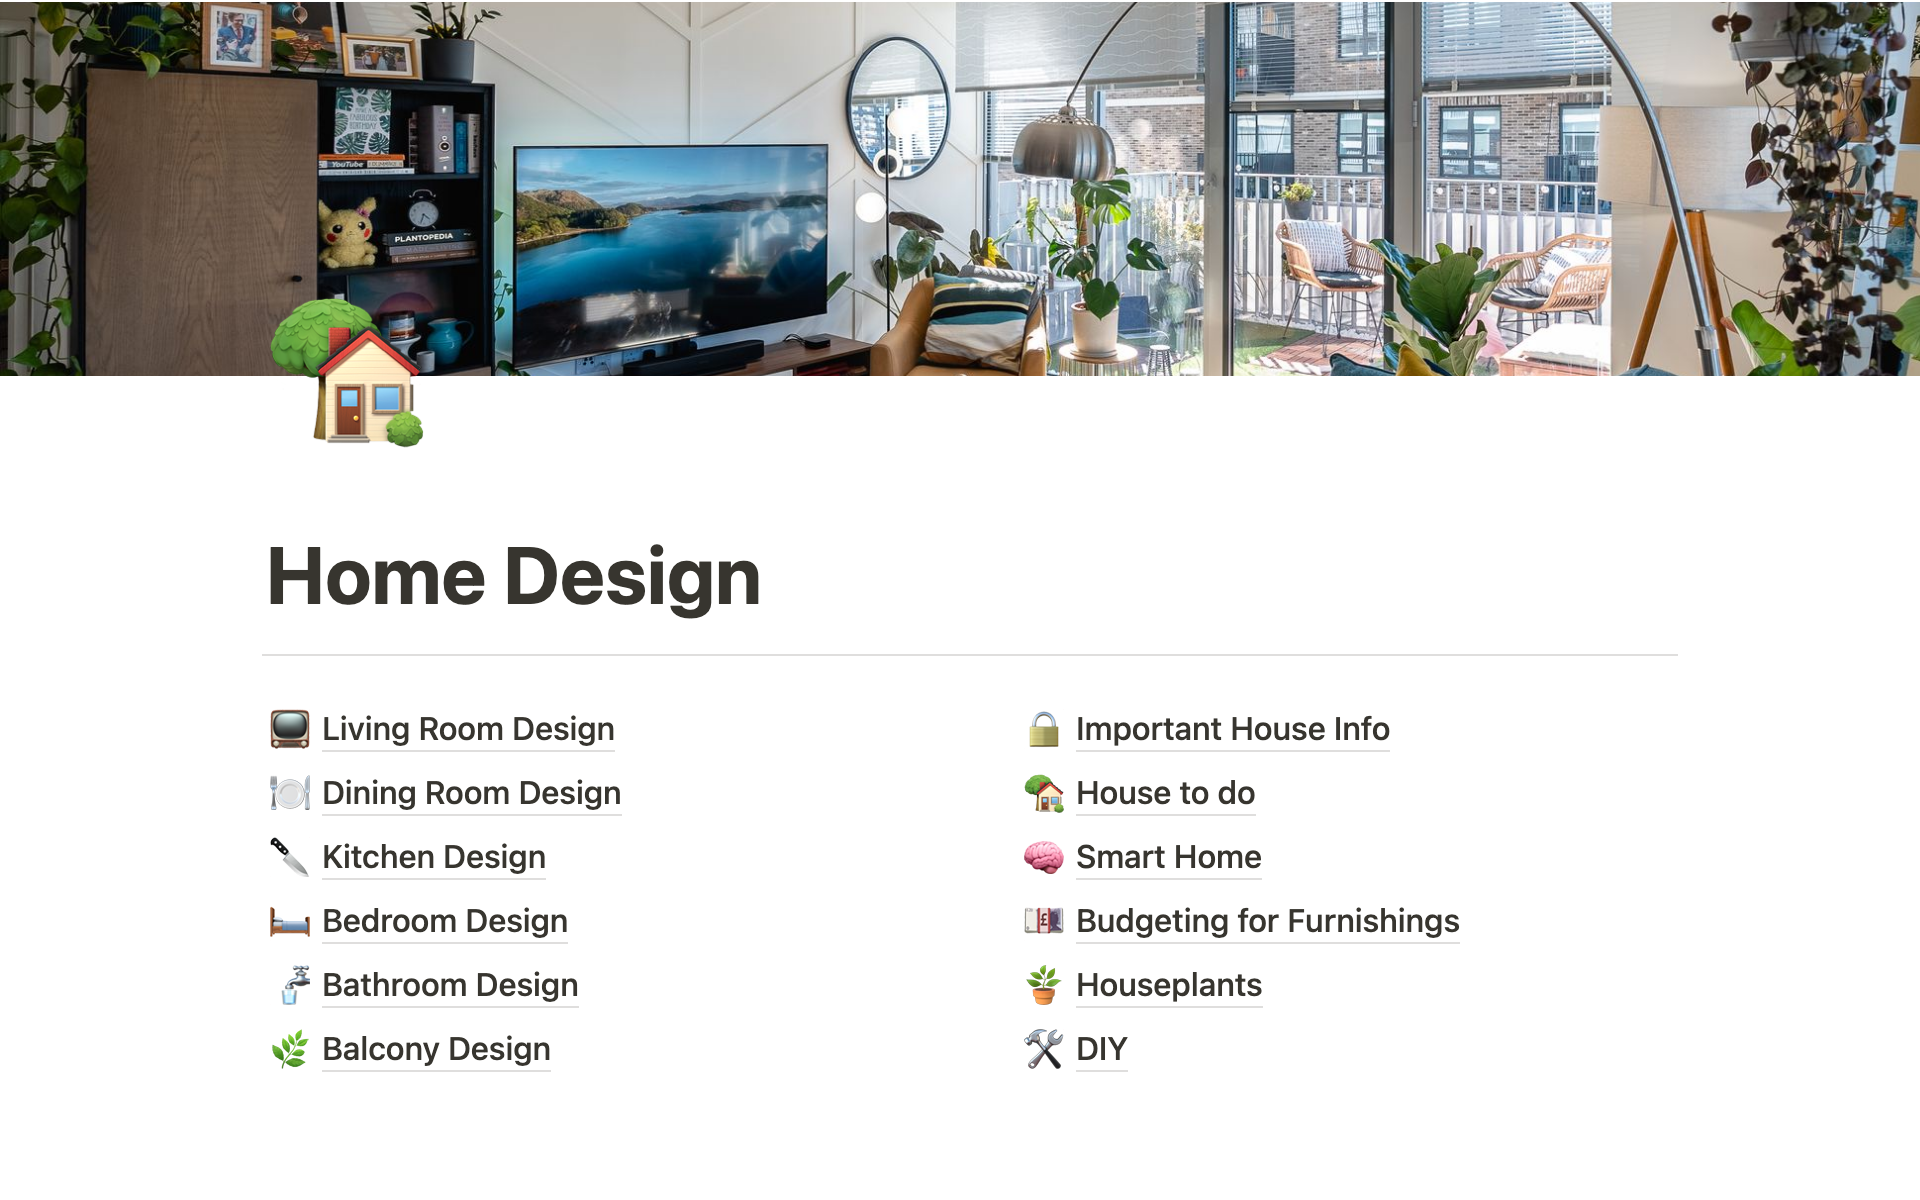 Help organise the design of your home.